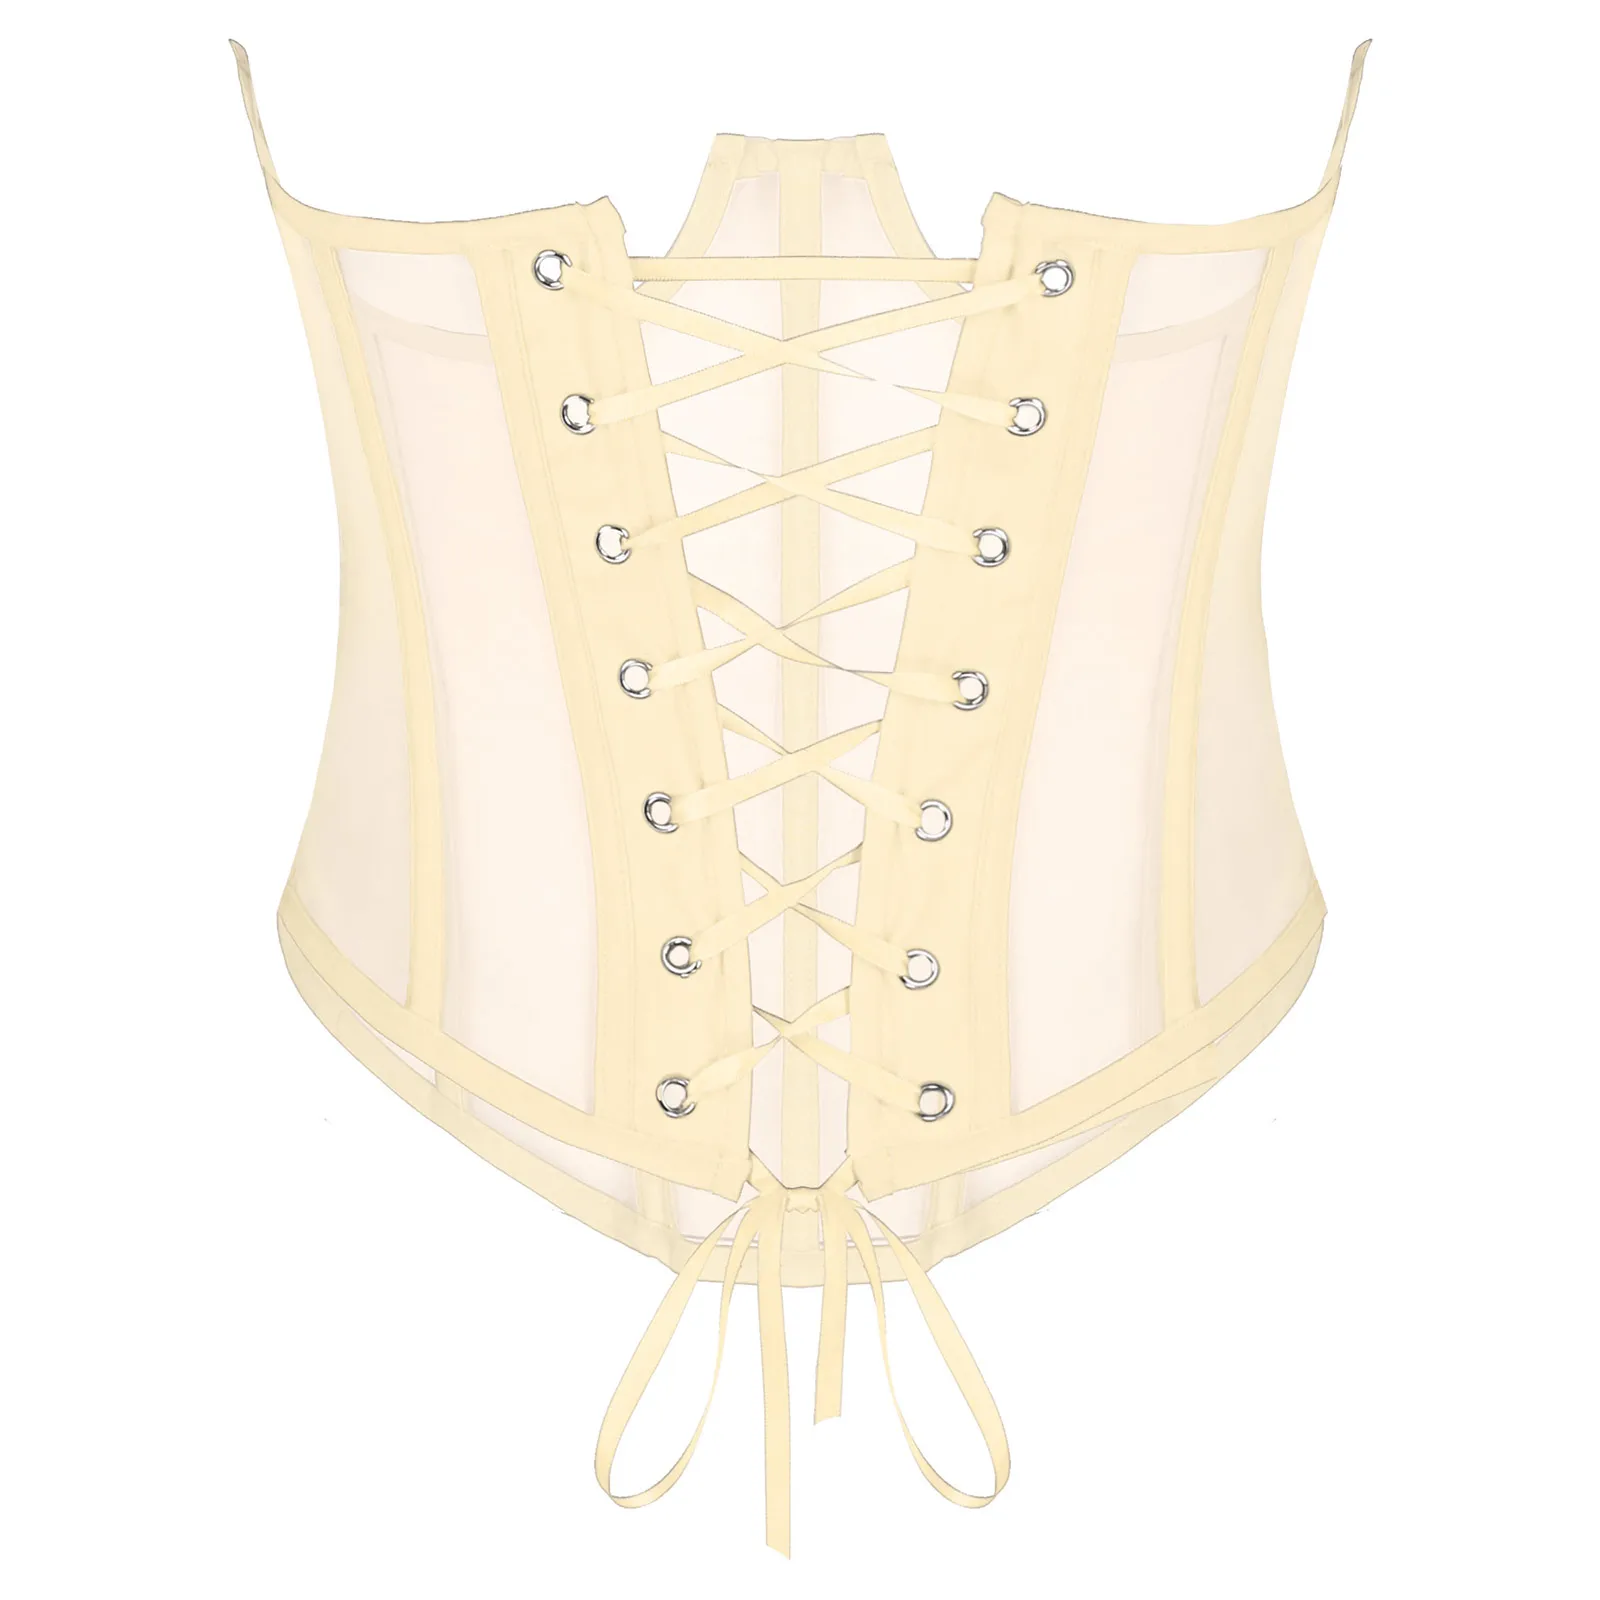 

Womens Female Sexy Shapers See-Through Corset Bustier LaceUp Corselet Underwear Slim Fit Body Shaper Girdle Cincher Big belt Pas